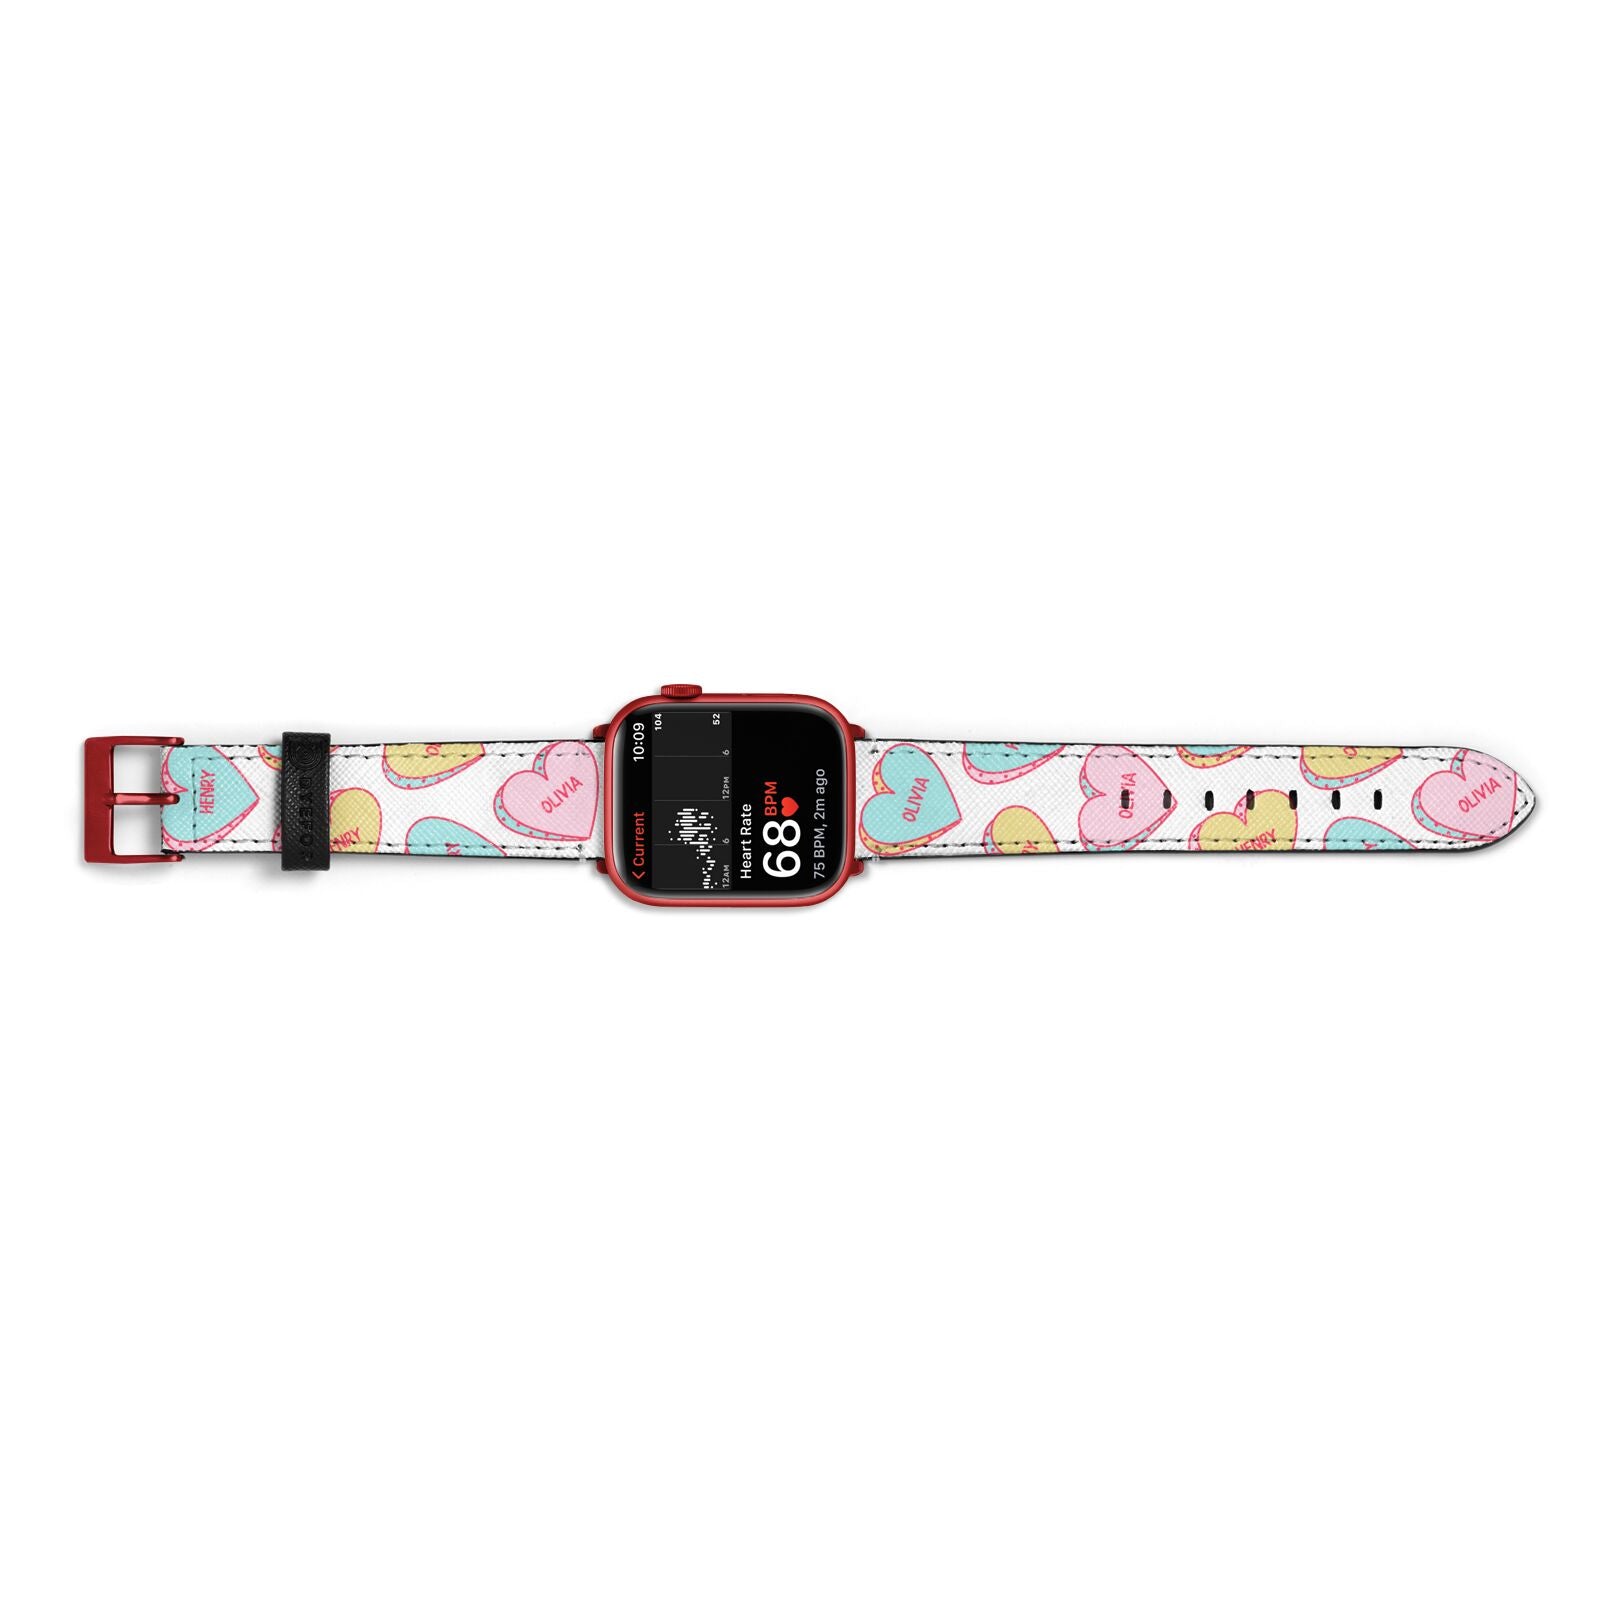 Personalised Heart Sweets Apple Watch Strap Size 38mm Landscape Image Red Hardware